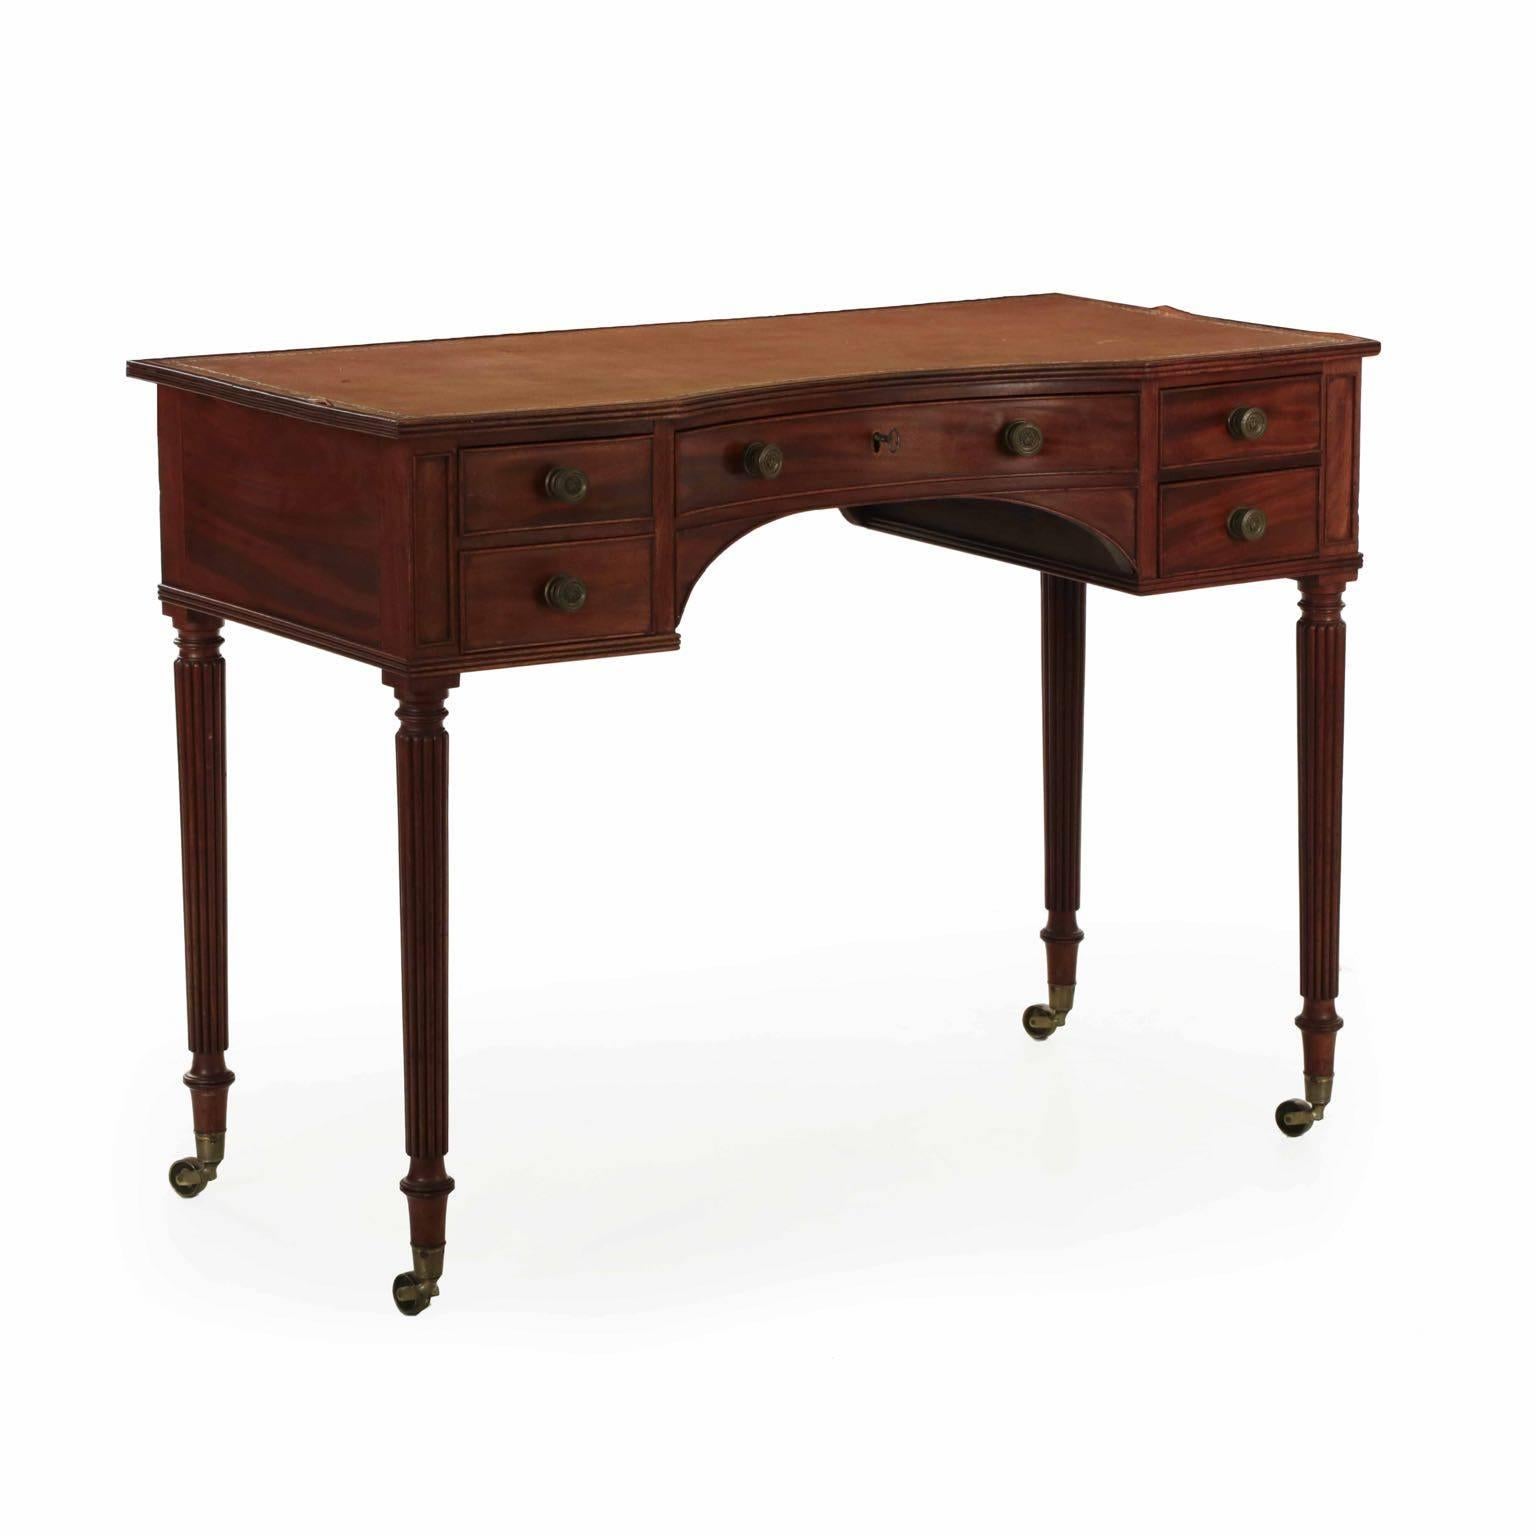 A very finely crafted writing table exemplifies the “neat and tidy” approach craftsmen brought to their work in England during the period. Everything about the case is well planned out and executed: in the drawers, each hand cut dovetails is